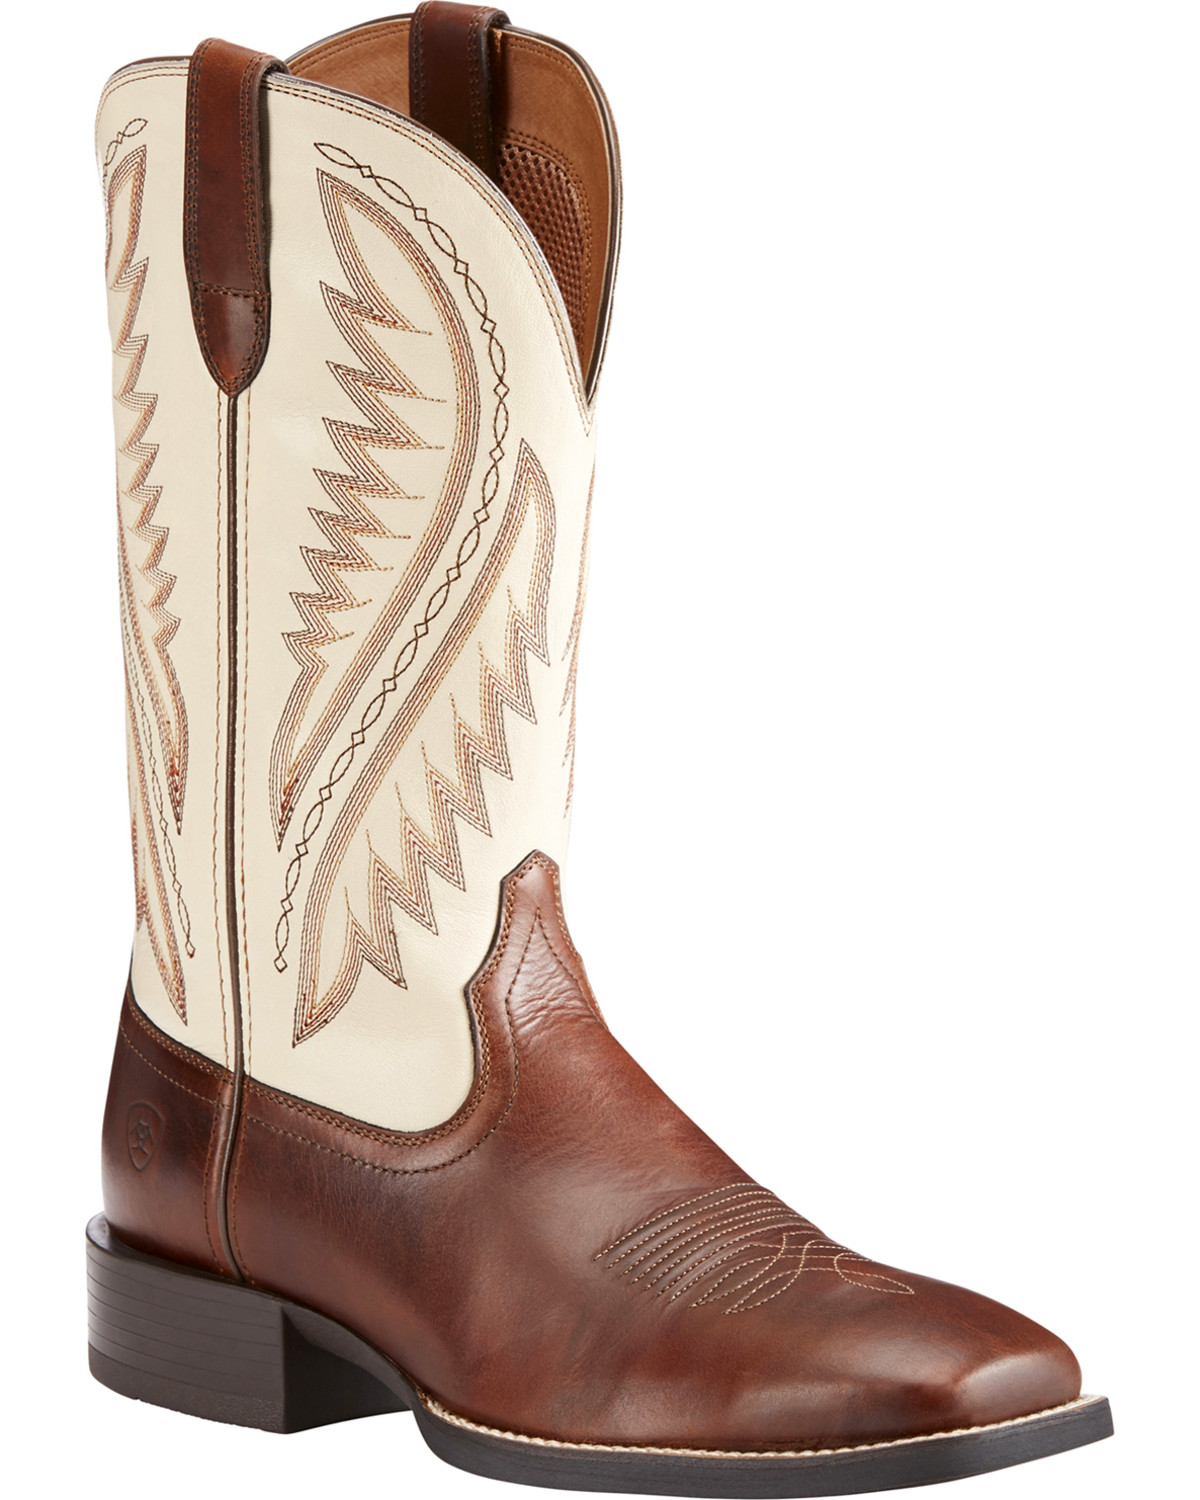 Ariat Men's Sport Stonewall Native Western Performance Boots - Broad Square Toe